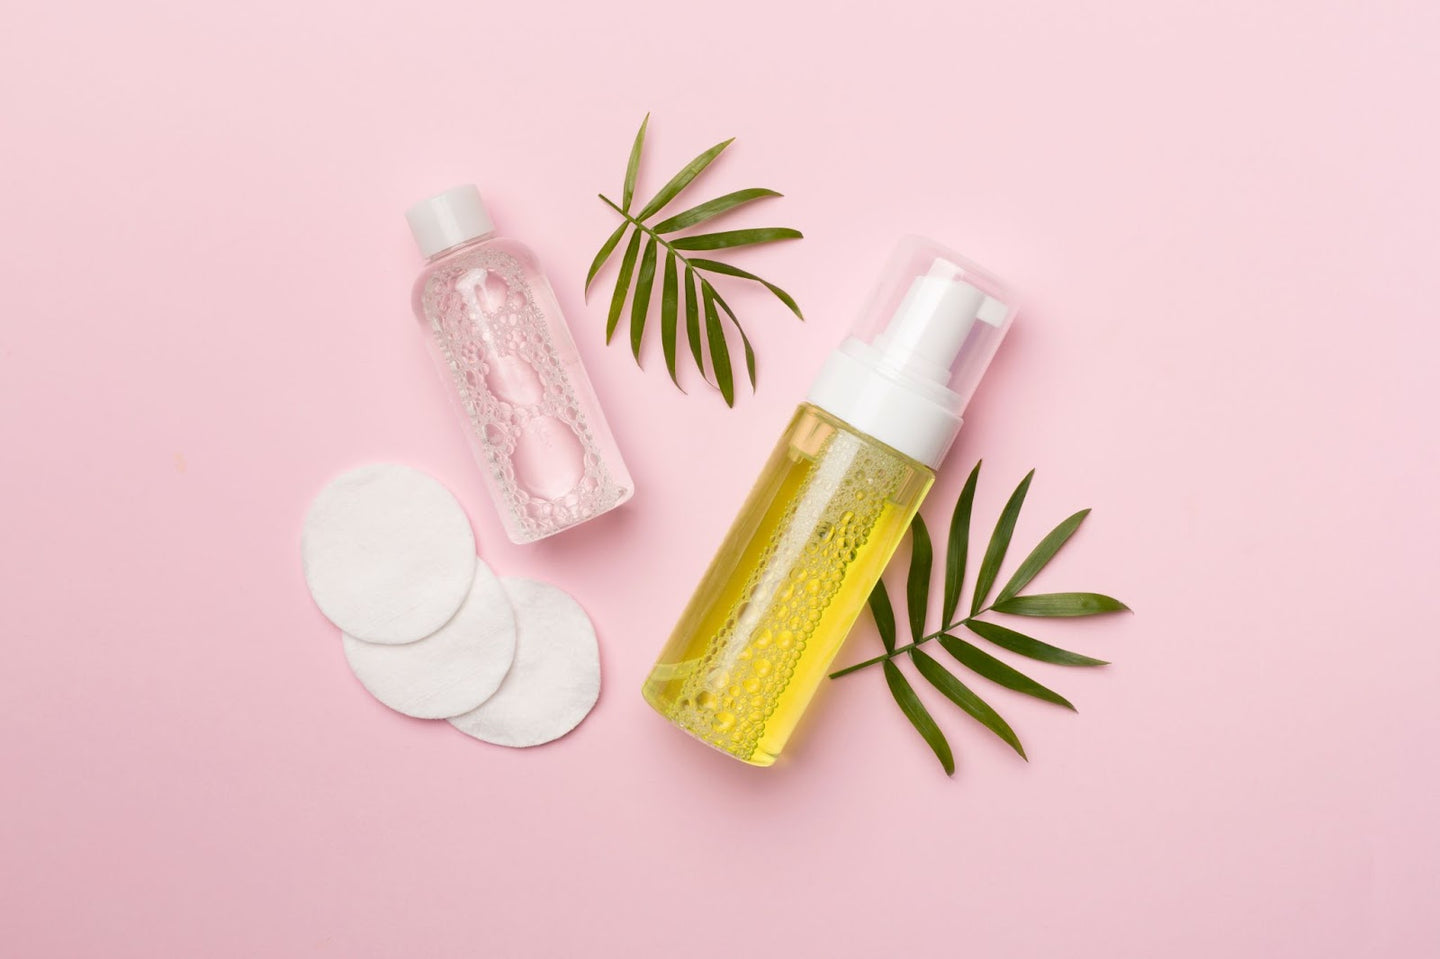 Micellar Water: What Is It and How to Use It?